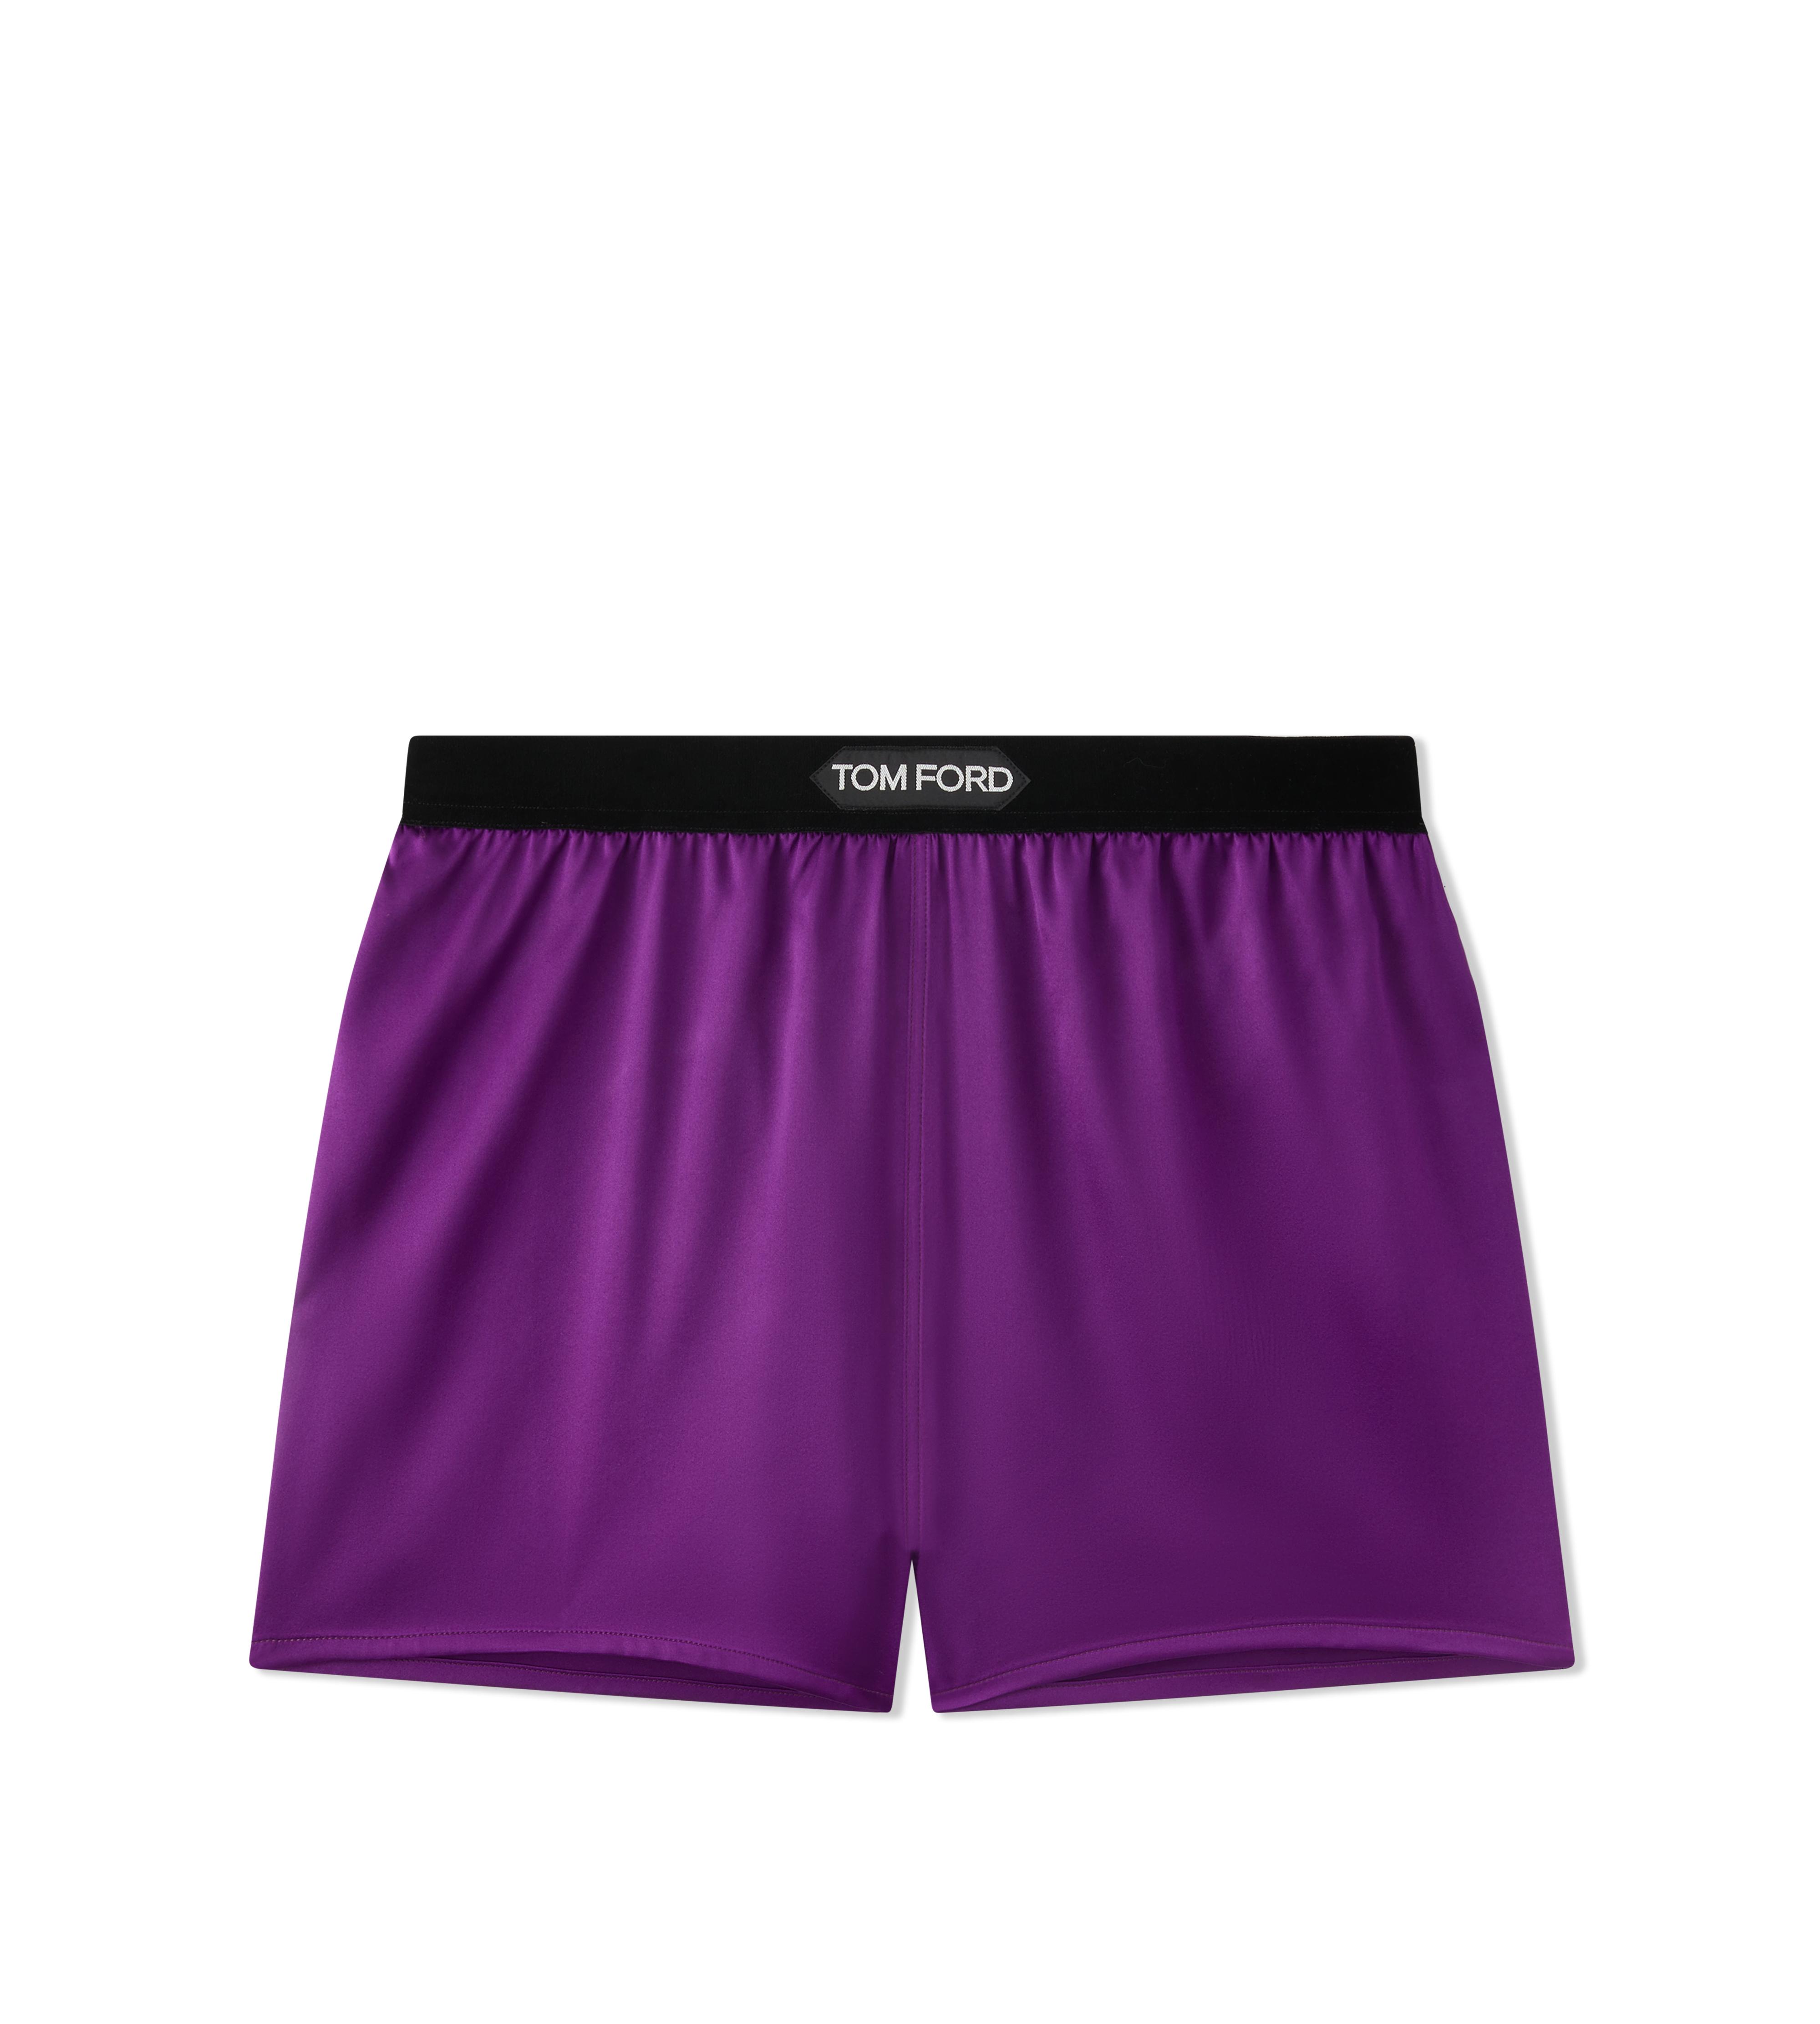 Satin shorts in pink - Tom Ford